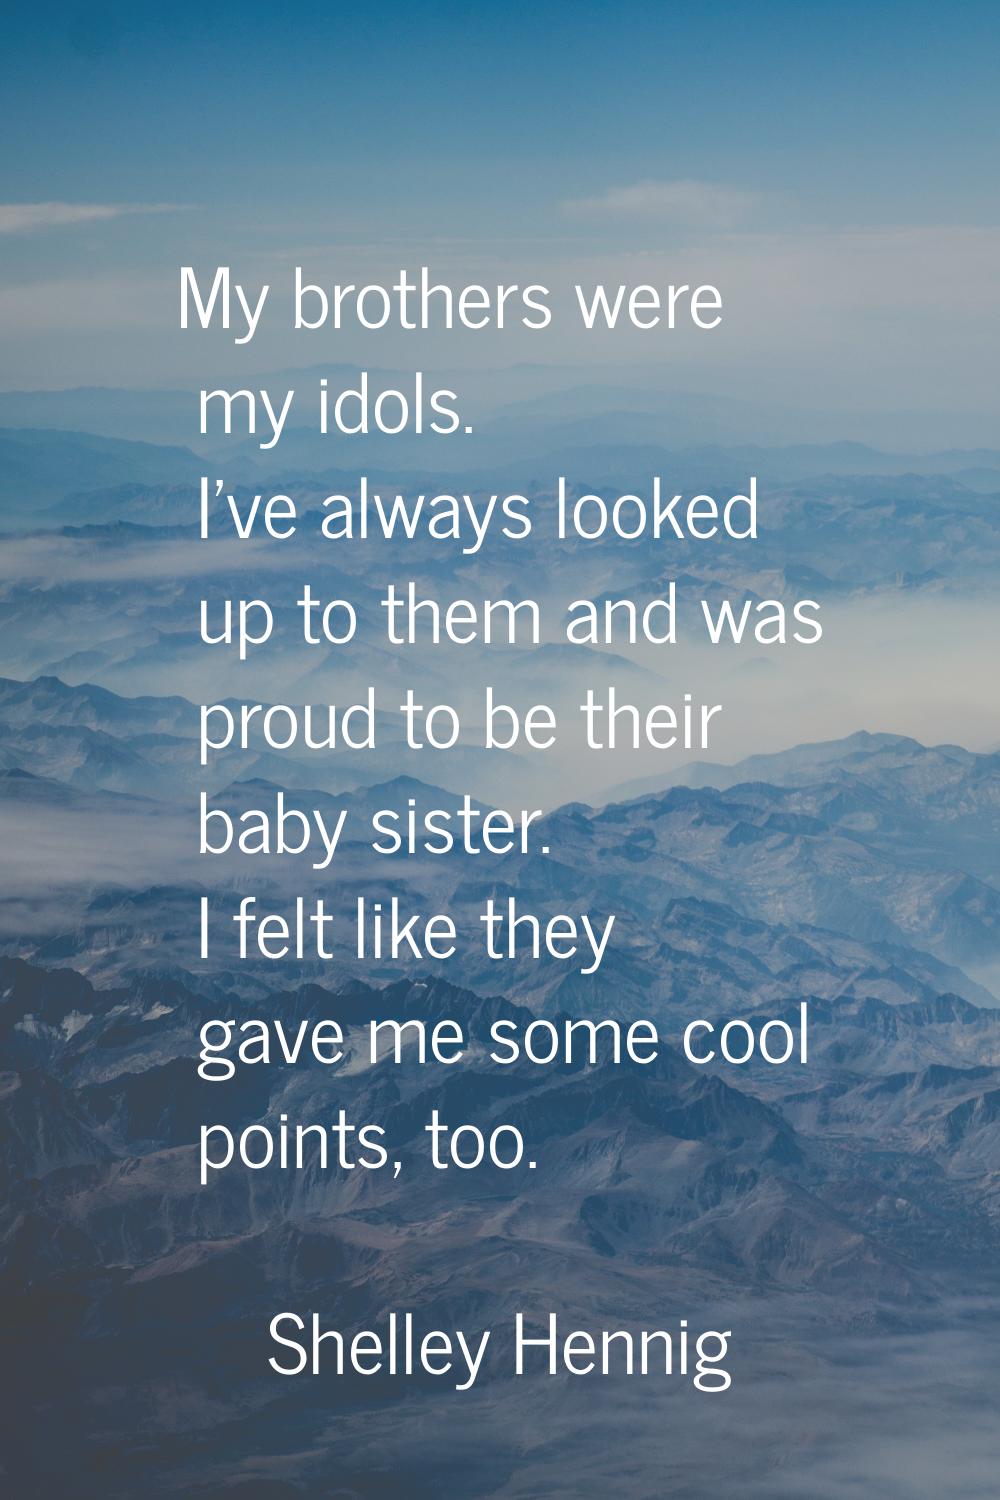 My brothers were my idols. I've always looked up to them and was proud to be their baby sister. I f